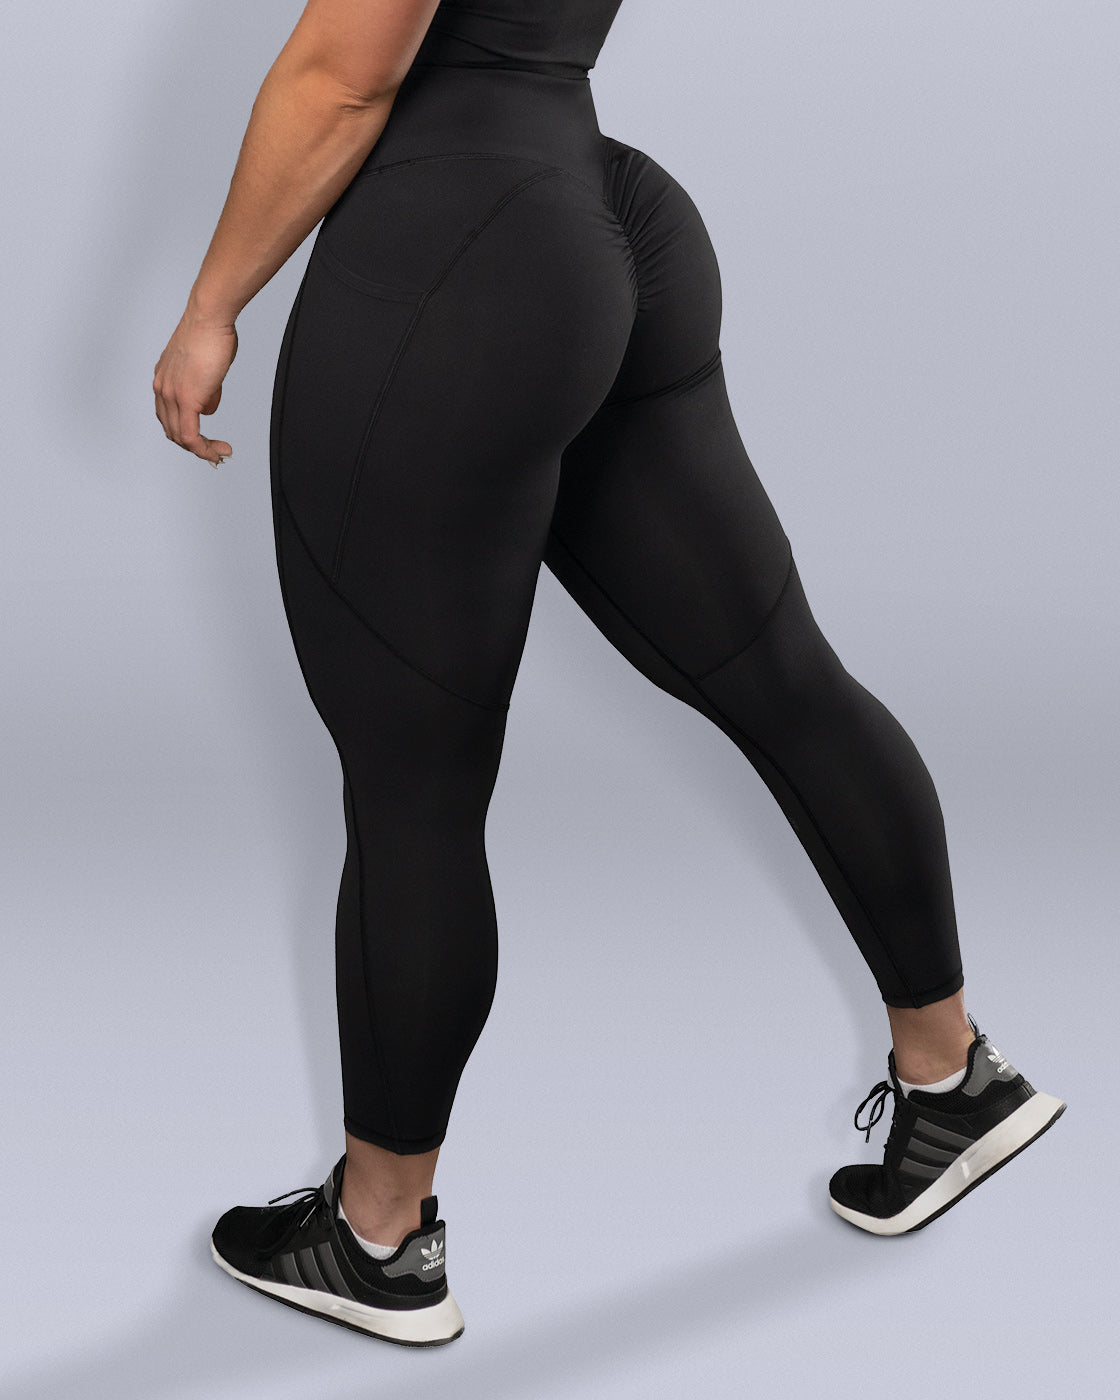 Summer Luxe Collection in Black - Black Scrunch Butt Gym Leggings